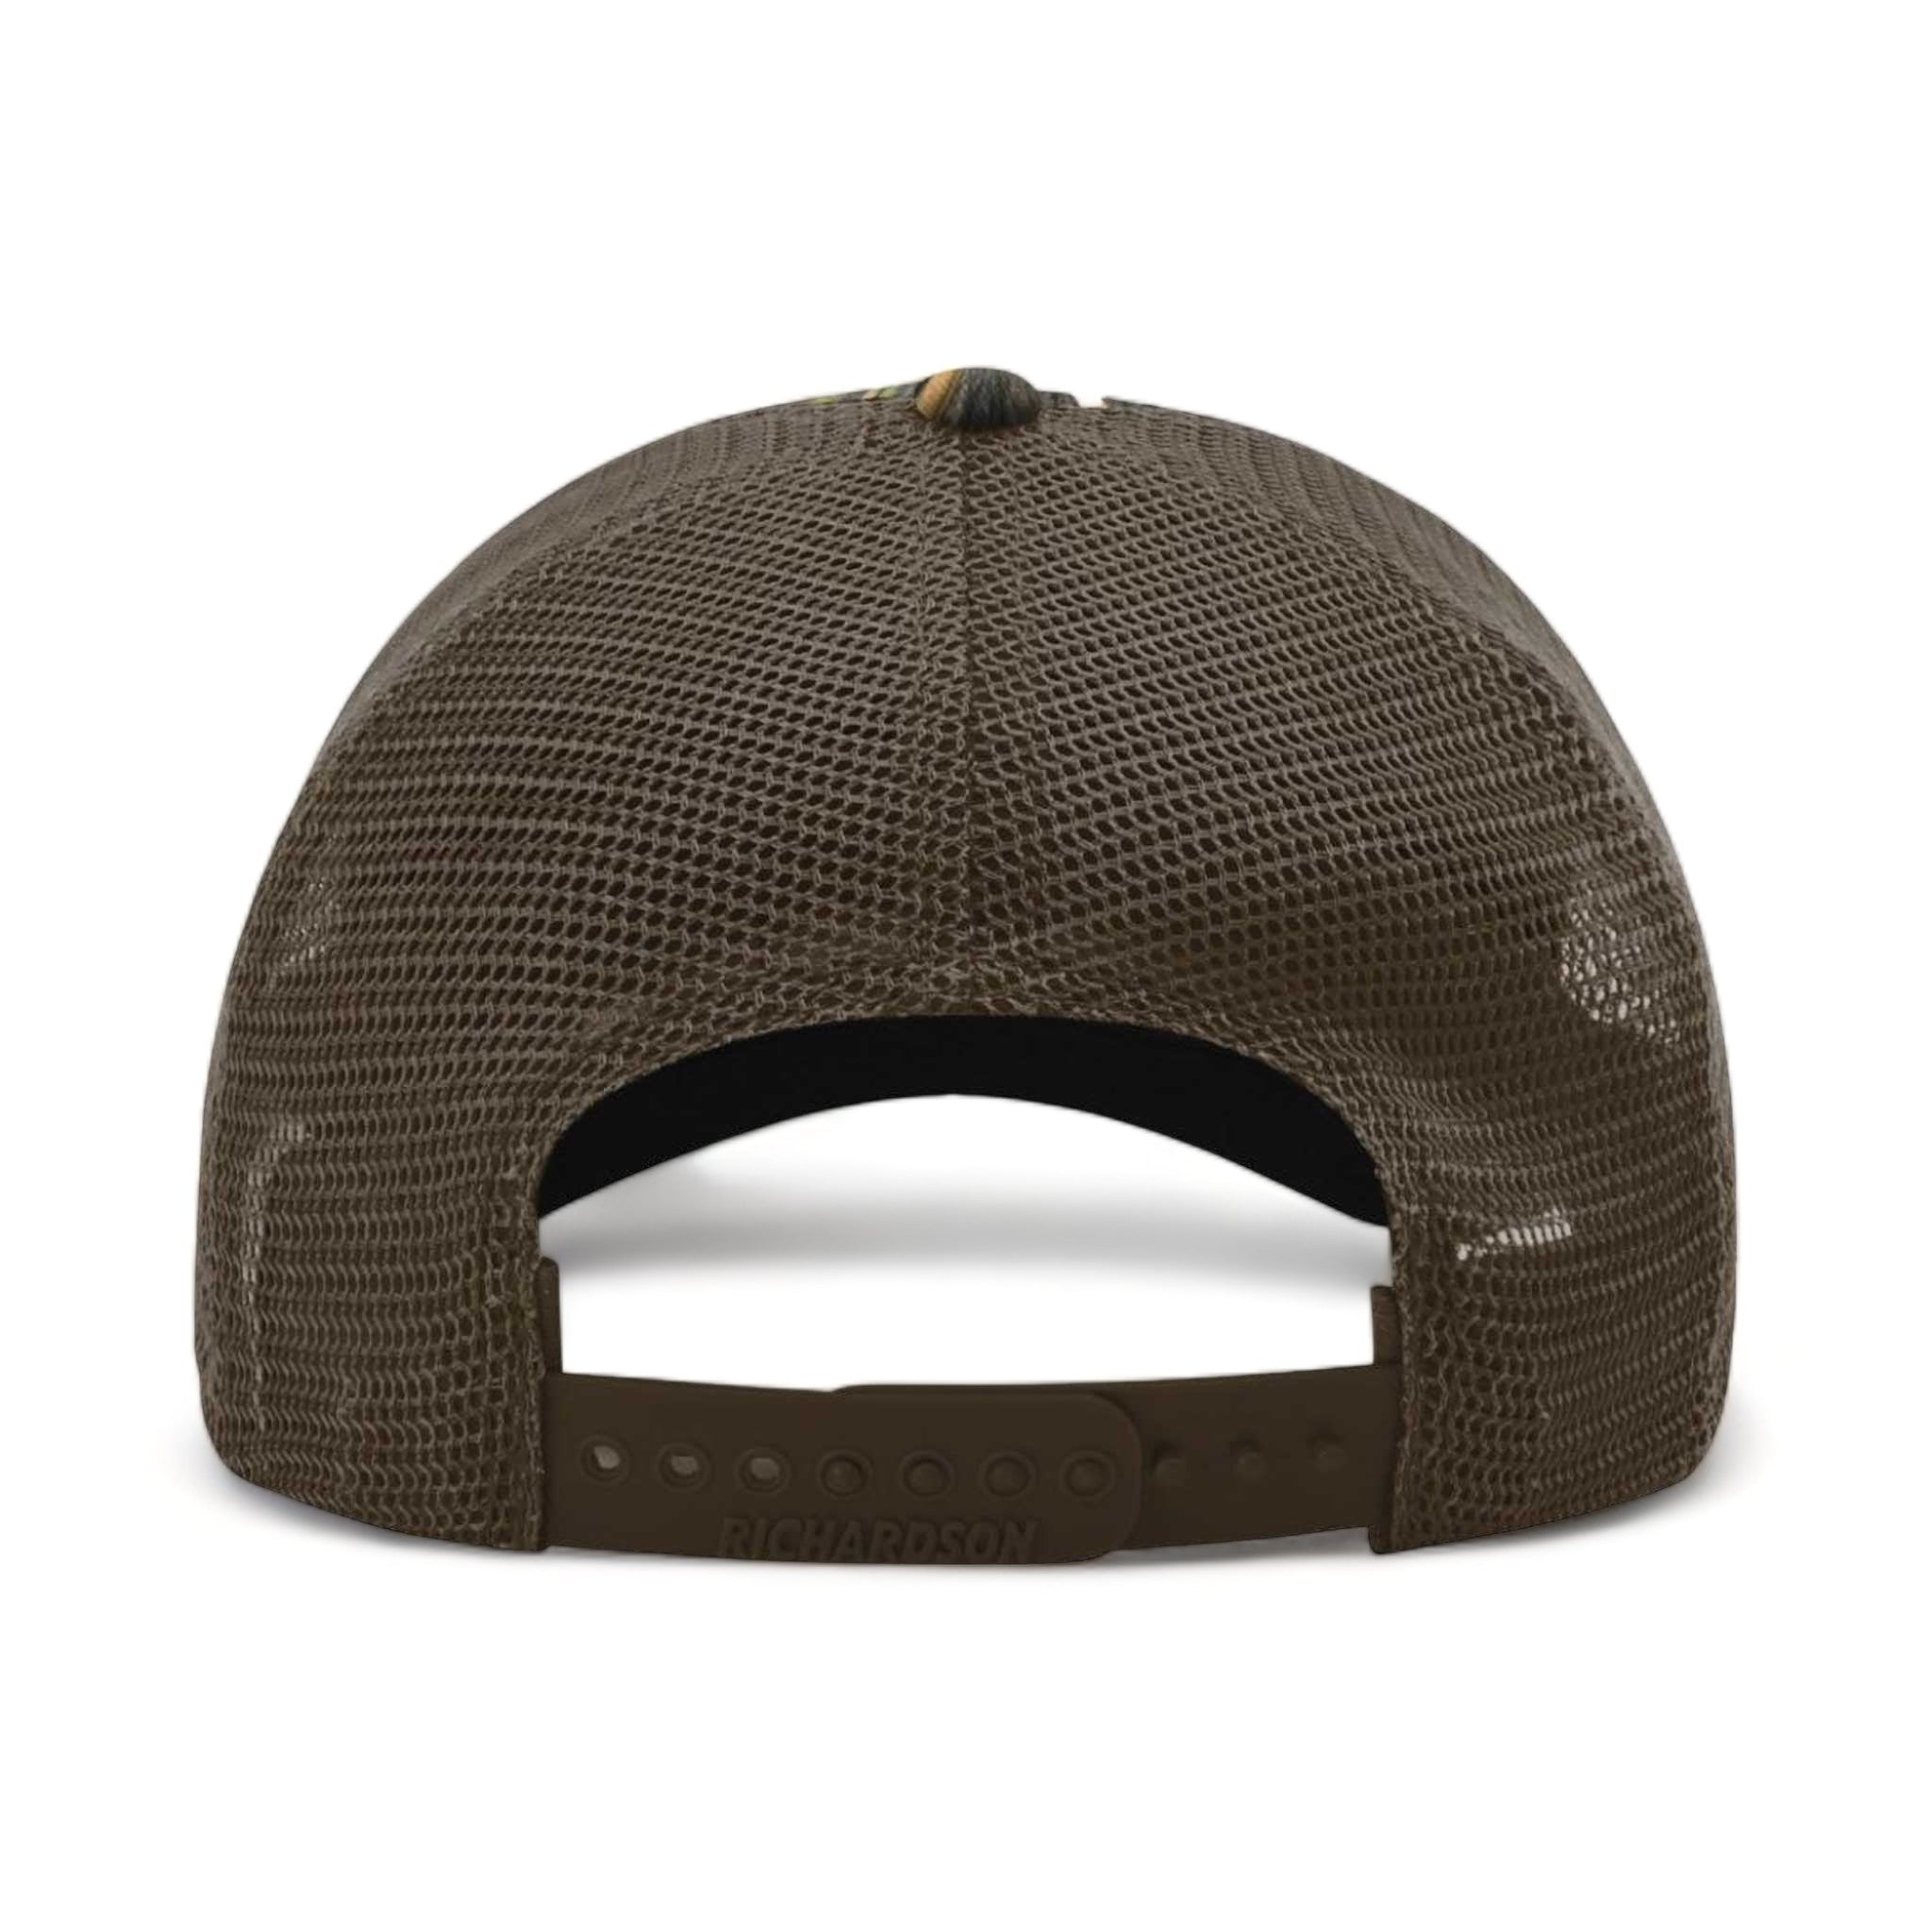 Back view of Richardson 111P custom hat in shadow grass habitat and brown